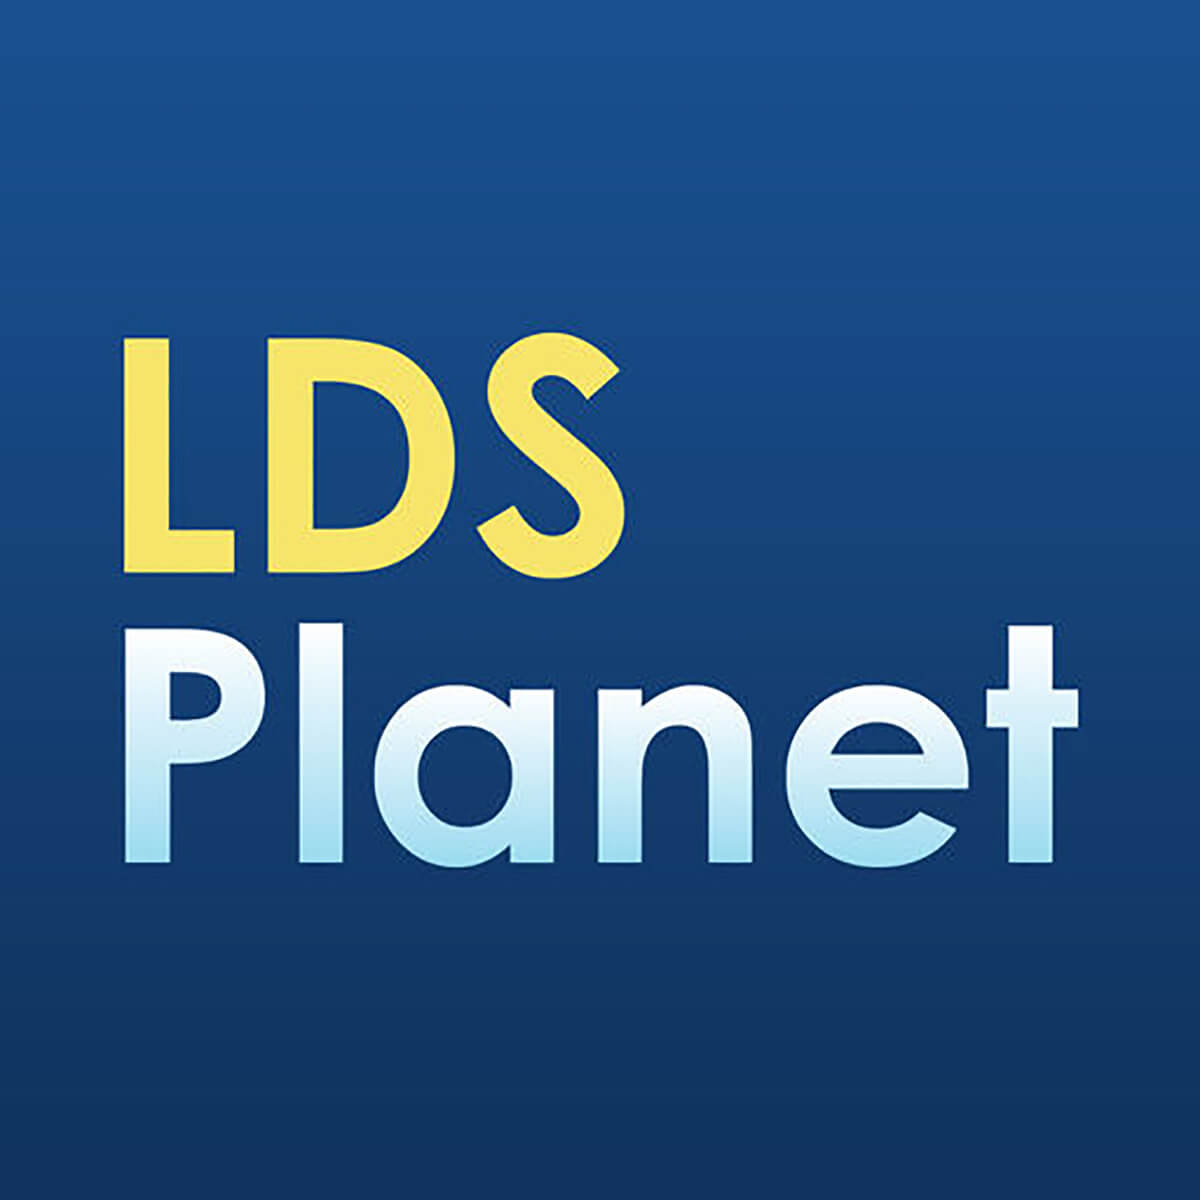 LDSPlanet Review December 2022 - Just Fakes or Real Dates? - DatingScout